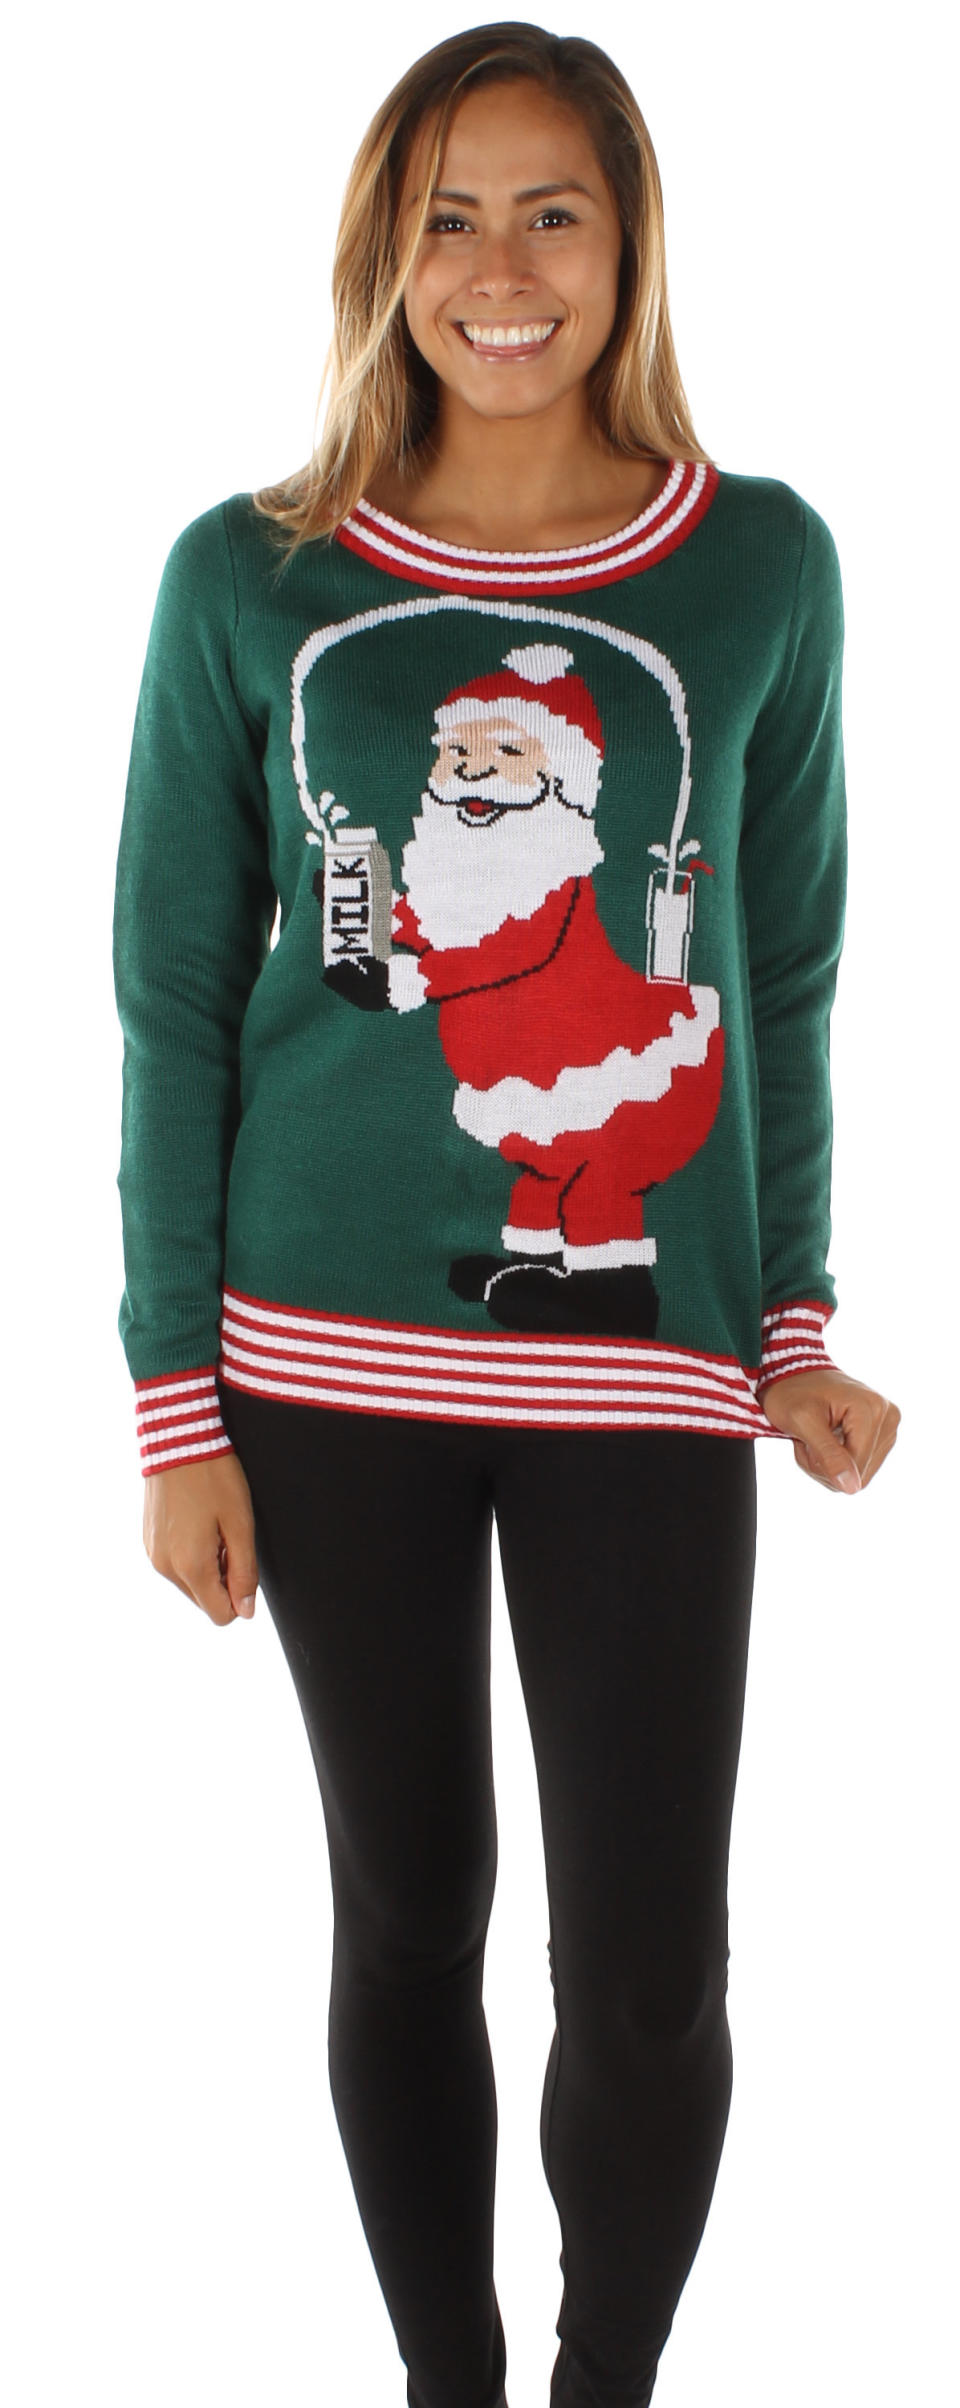 This doesn't show Santa's butt crack, but his curvaceous body is still <a href="https://www.tipsyelves.com/womens-break-the-internet-sweater" target="_blank">the focus of this sweater.</a>&nbsp;I'm sure Mrs. Claus is proud. So proud.